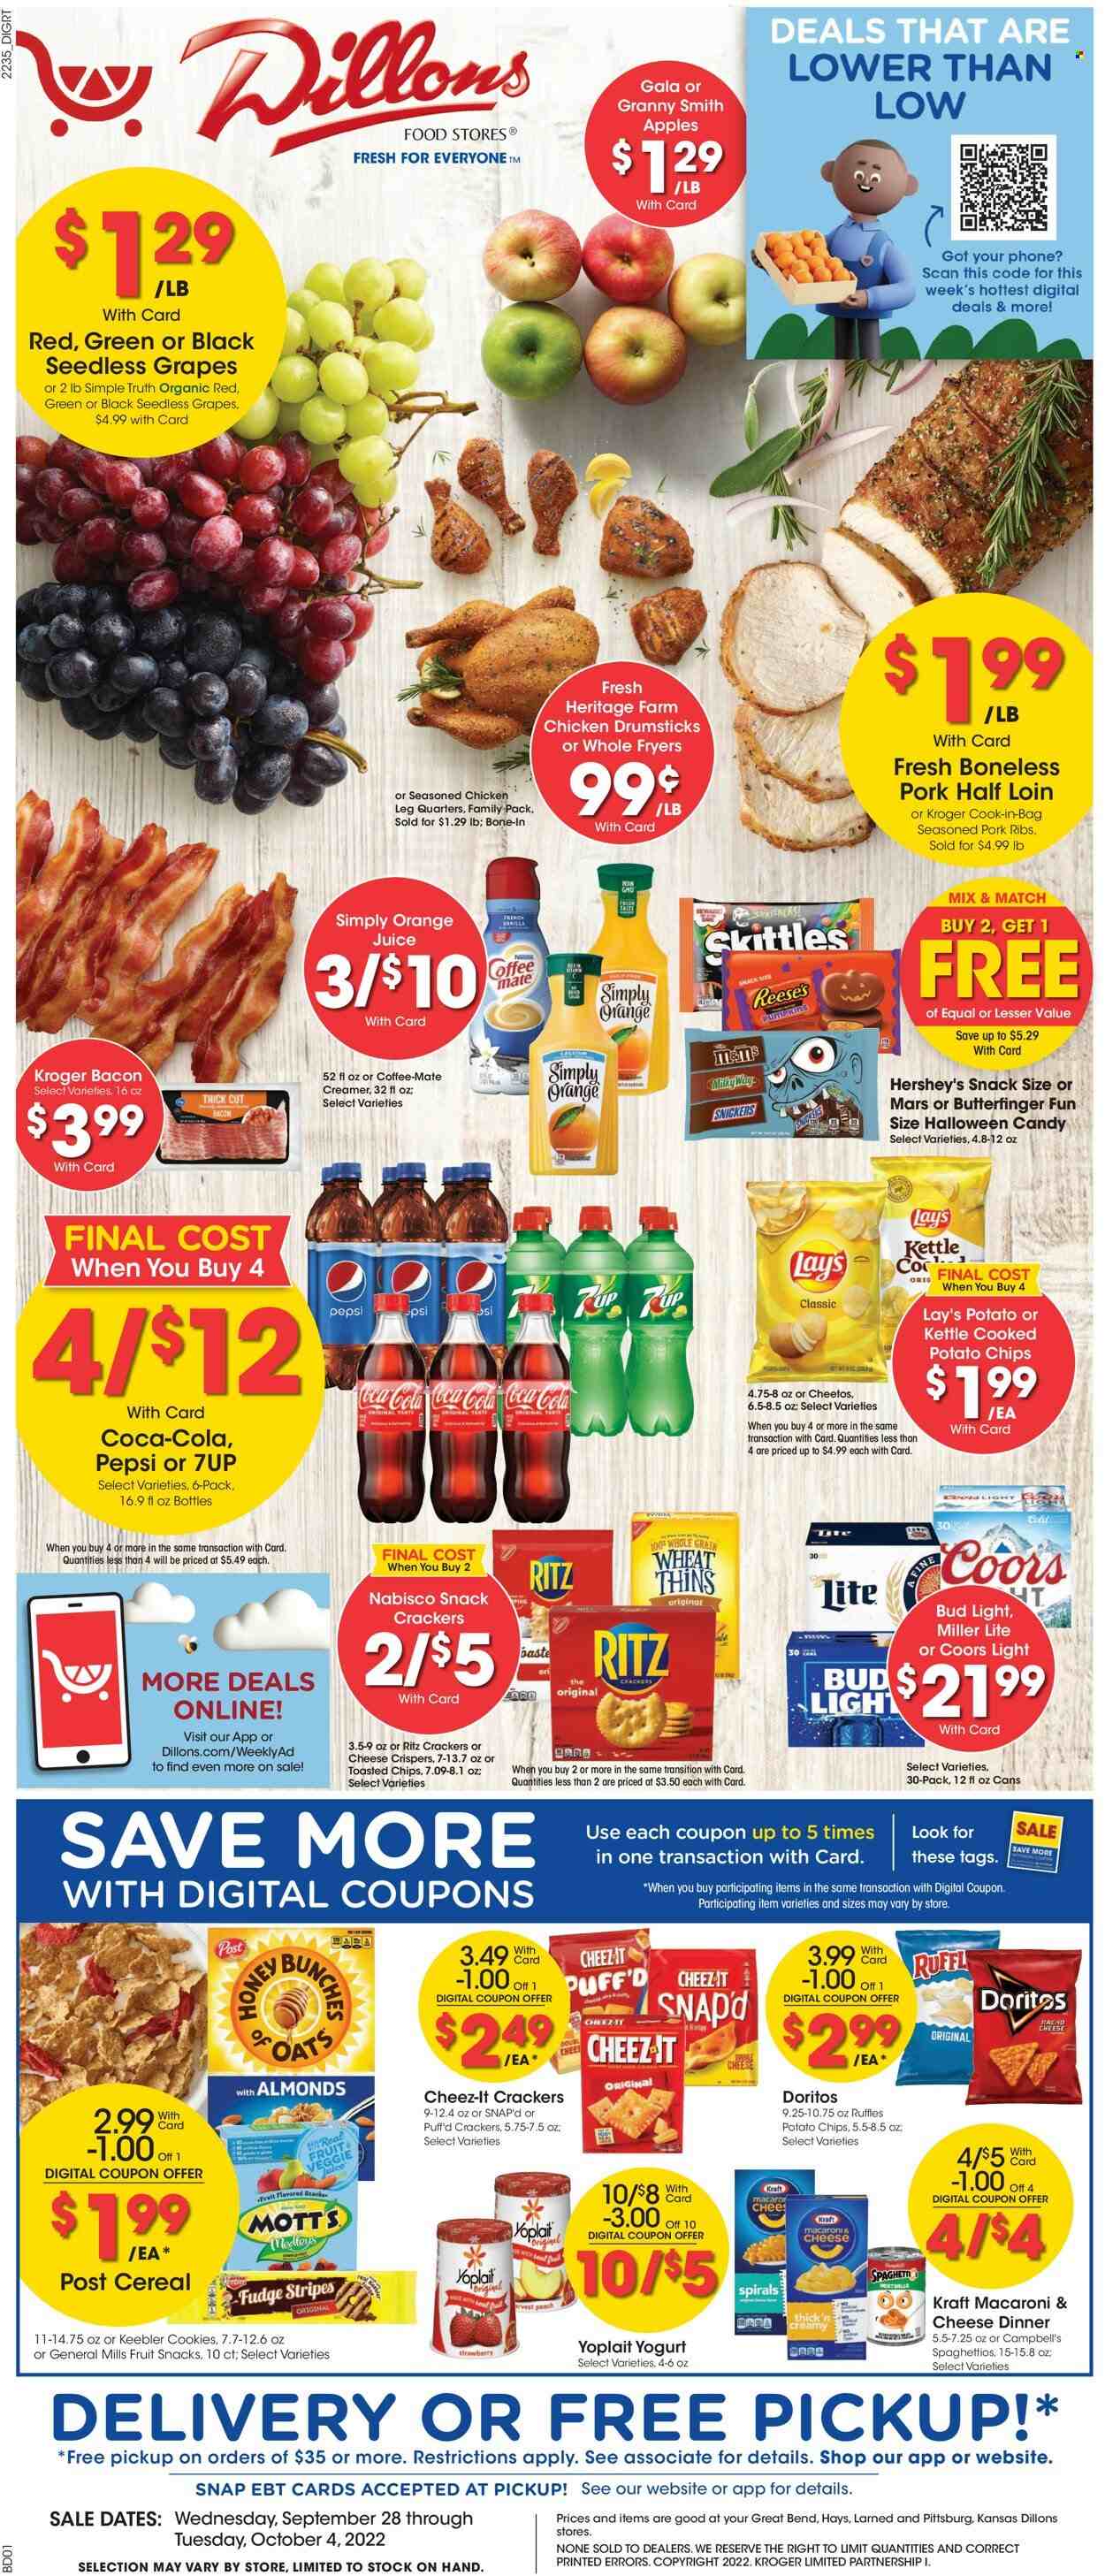 thumbnail - Dillons Flyer - 09/28/2022 - 10/04/2022 - Sales products - pumpkin, apples, Gala, grapes, seedless grapes, Granny Smith, Mott's, Campbell's, macaroni & cheese, spaghetti, Kraft®, bacon, yoghurt, Yoplait, Coffee-Mate, creamer, Reese's, Hershey's, cookies, fudge, Milky Way, Snickers, Mars, crackers, Skittles, fruit snack, Keebler, RITZ, Doritos, potato chips, Cheetos, chips, Lay’s, Thins, Cheez-It, Ruffles, cereals, honey, Coca-Cola, Pepsi, orange juice, juice, 7UP, beer, Bud Light, chicken legs, chicken drumsticks, pork meat, pork ribs, Halloween, bunches, calcium, Miller Lite, Coors. Page 1.